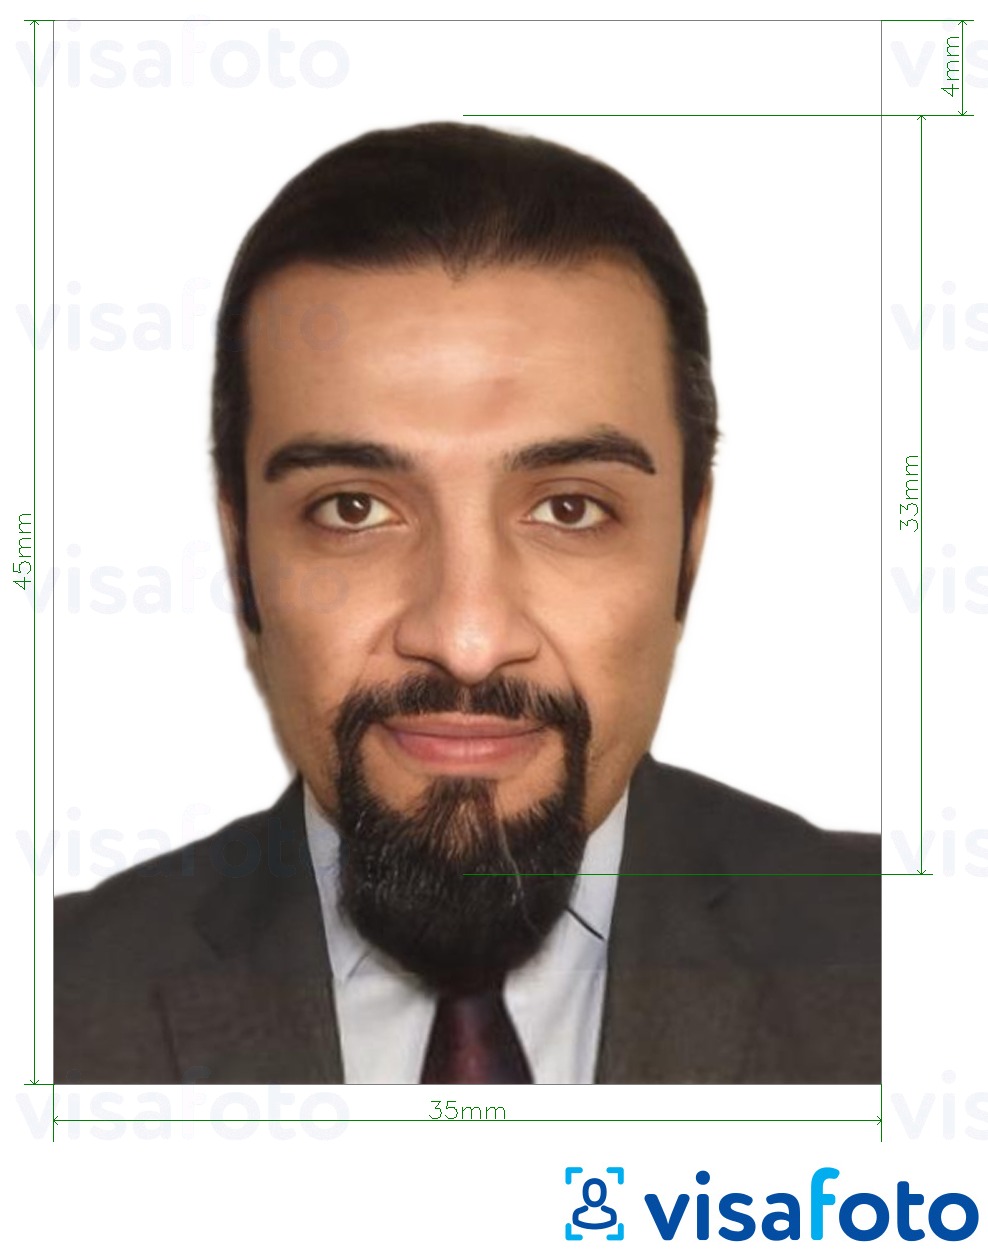 Example of photo for Jordan ID card 3.5x4.5 cm (35x45 mm) with exact size specification